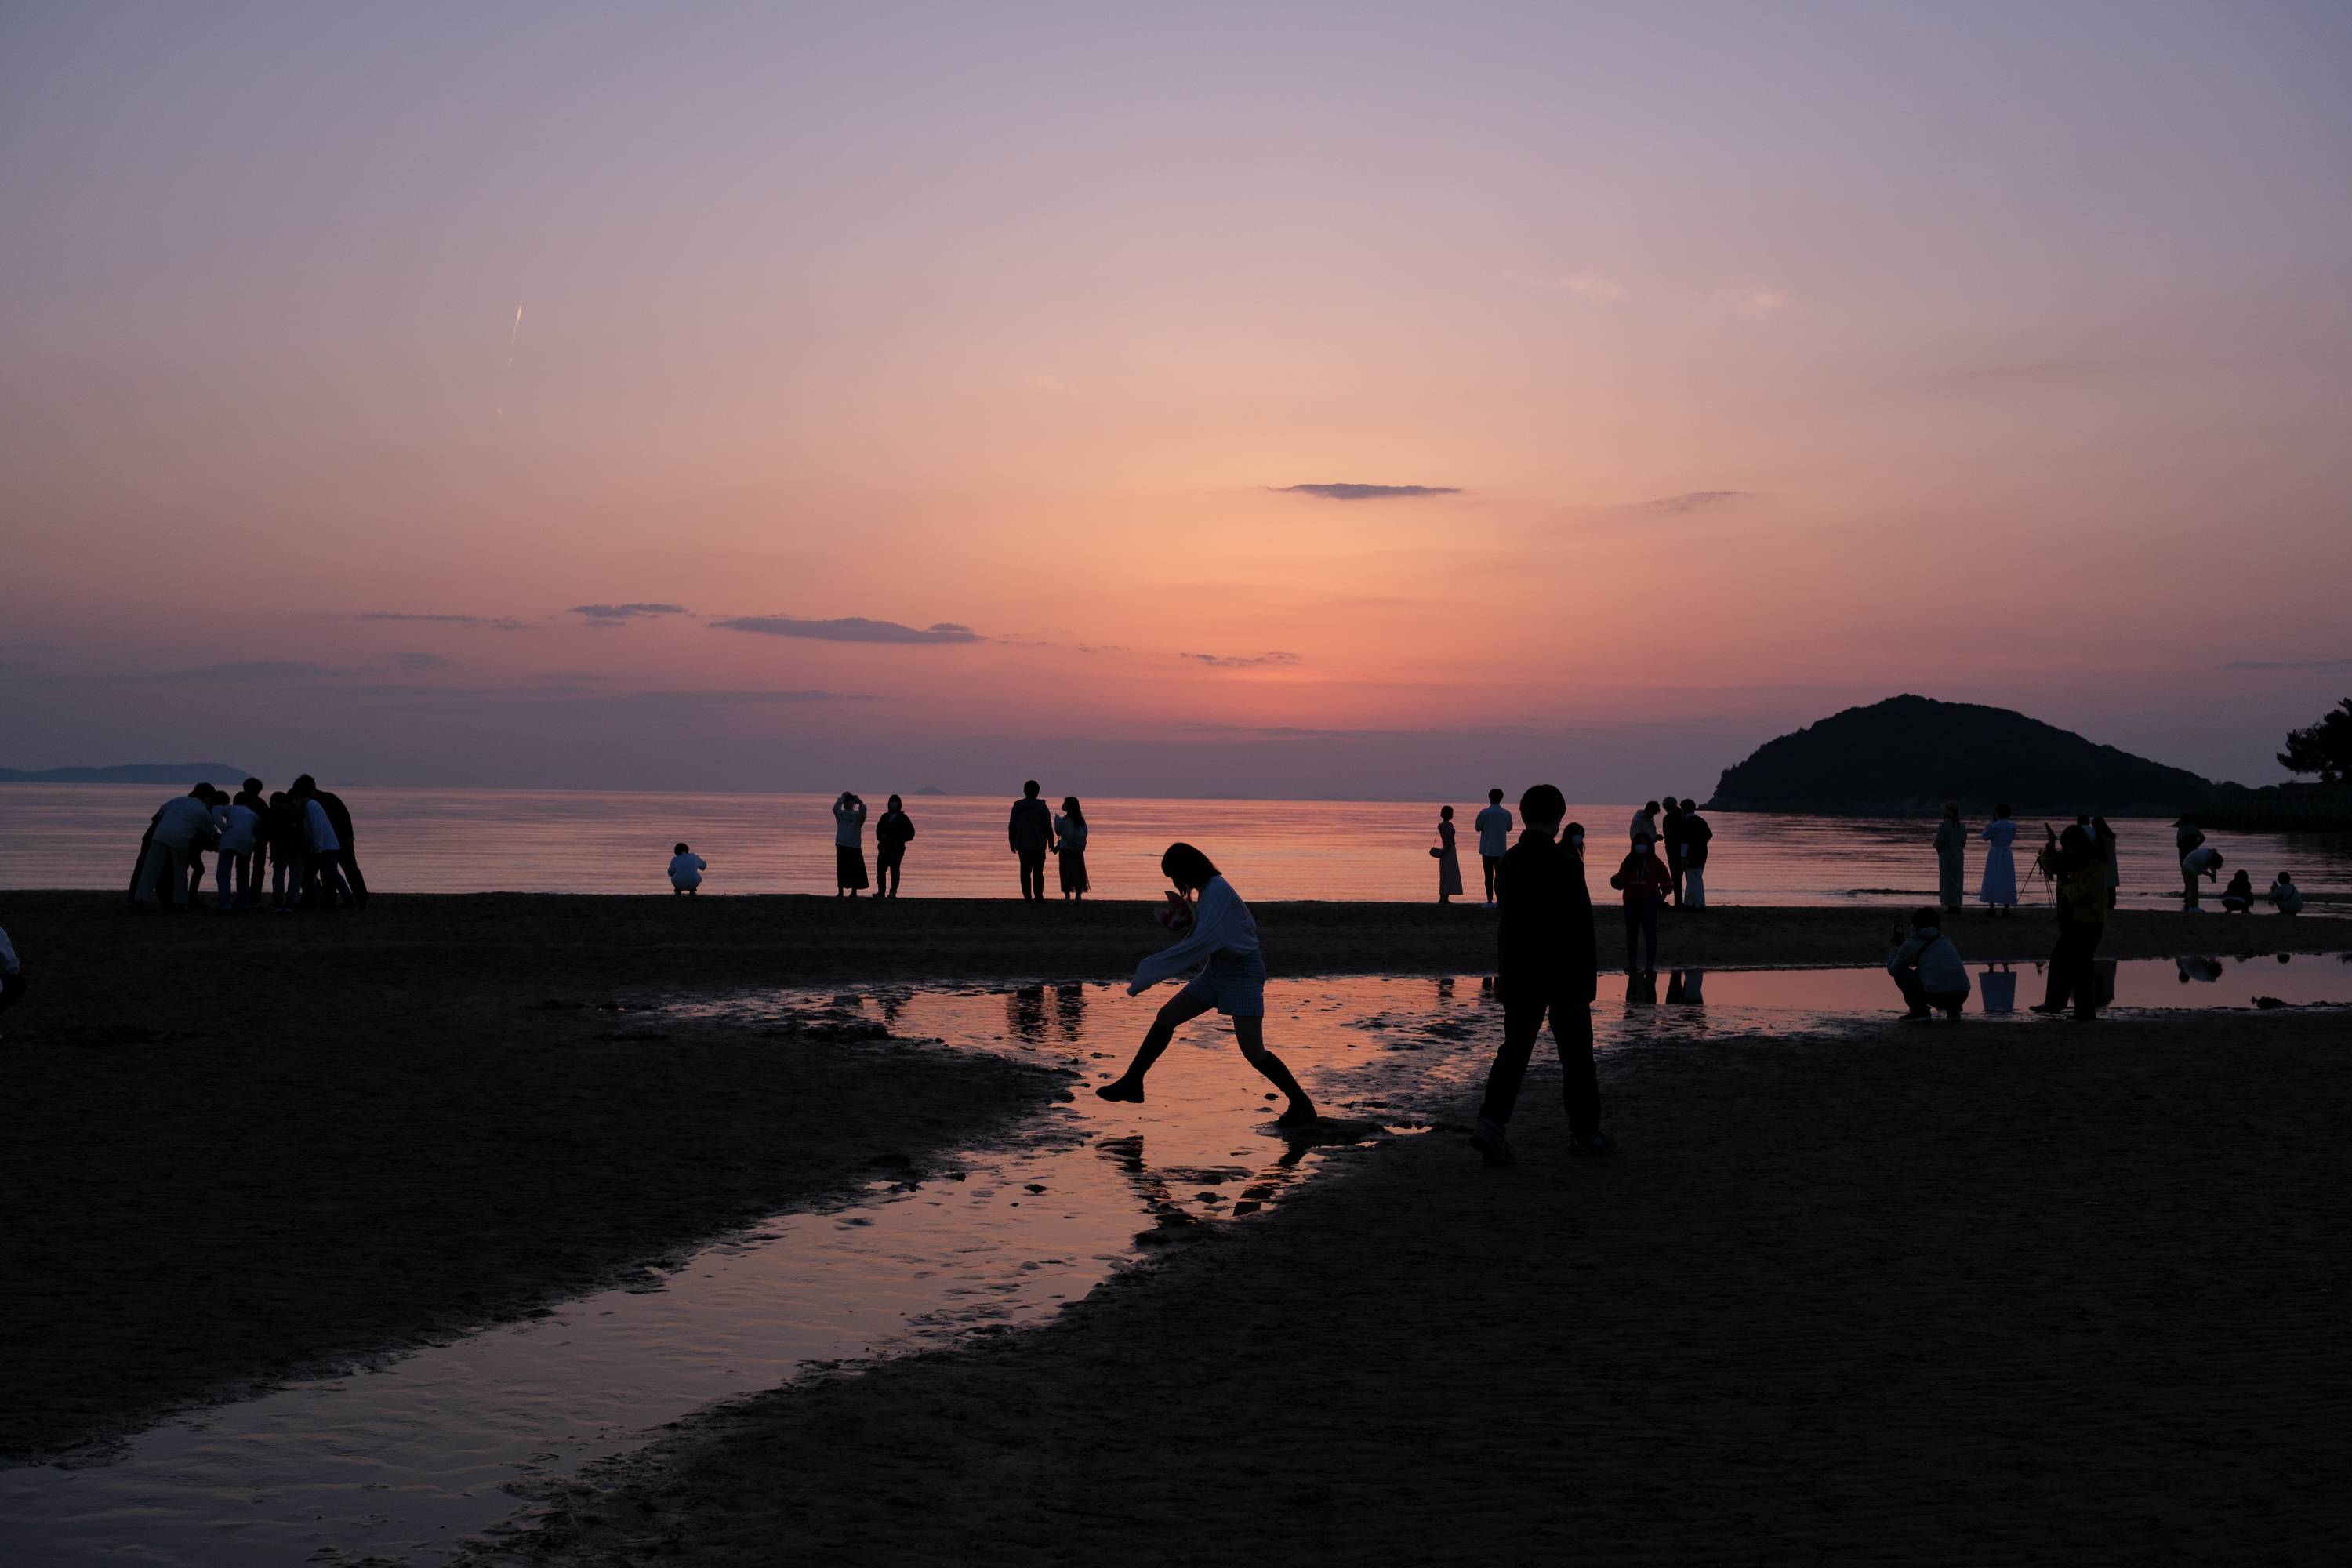 Locals and visiting college students enjoy the mirrored sunset at Chichibugahama Beach in Mitoyo. The beach went viral on Instagram and now draws daytrippers from around the region. | LANCE HENDERSTEIN